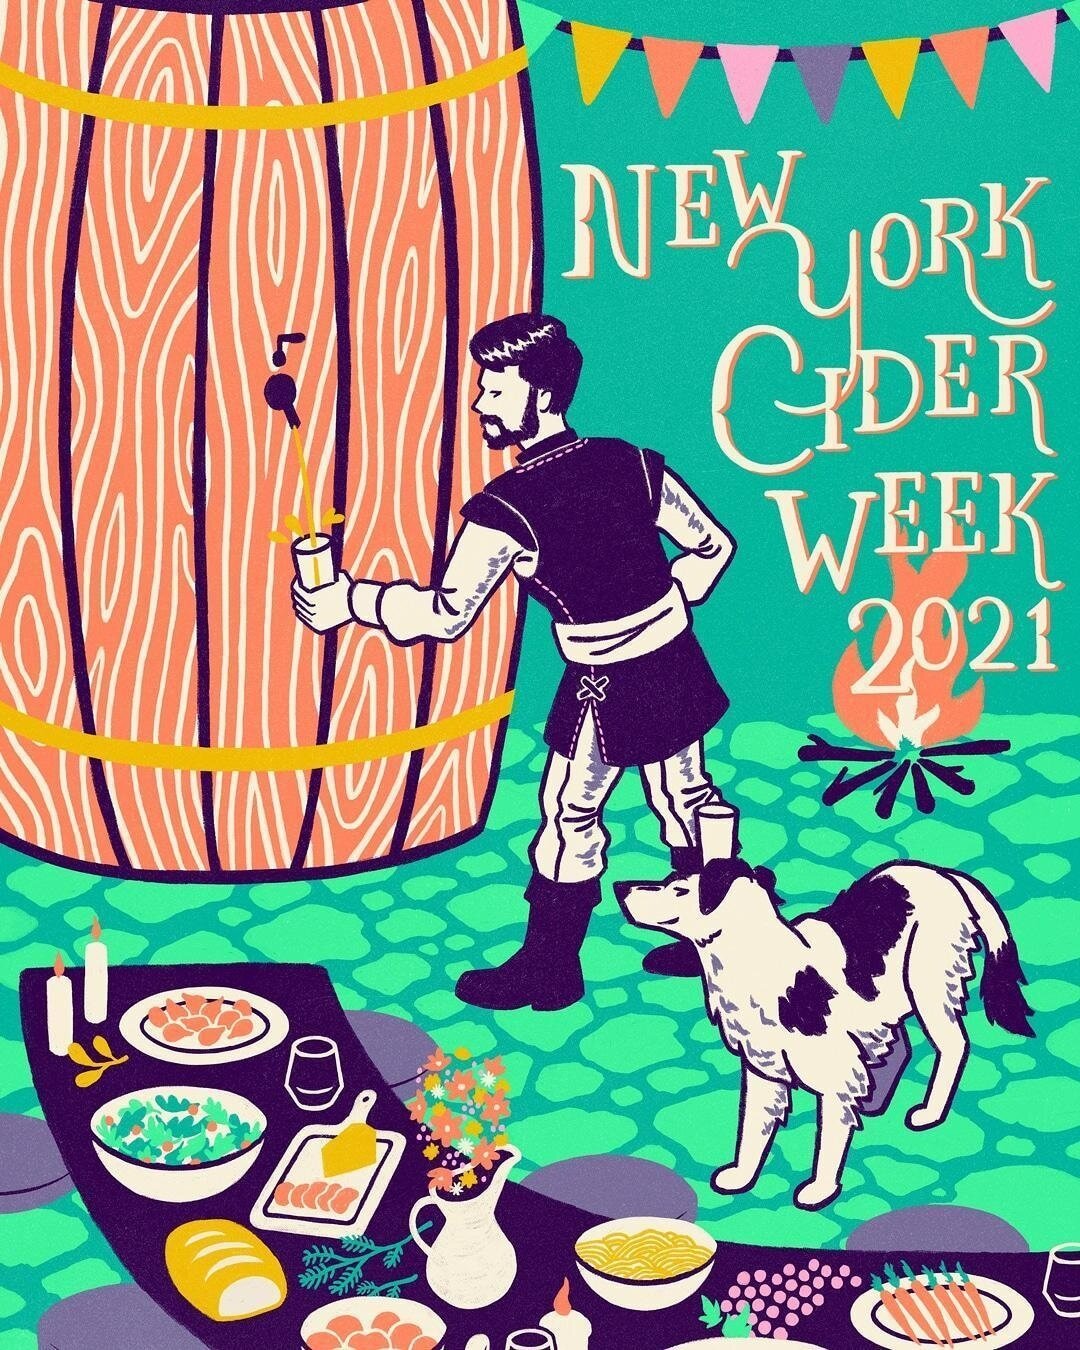 It's New York Cider Week! 🎉⁠ 🗽⁠
⁠
We are keeping #NYCW low-key this year again by hosting an online tasting. ⁠
⁠
HOW TO PARTICIPATE &bull; Stop by any Craft + Carry location listed below, pick up a mixed four-pack + tasting postcard. Scan the QR co